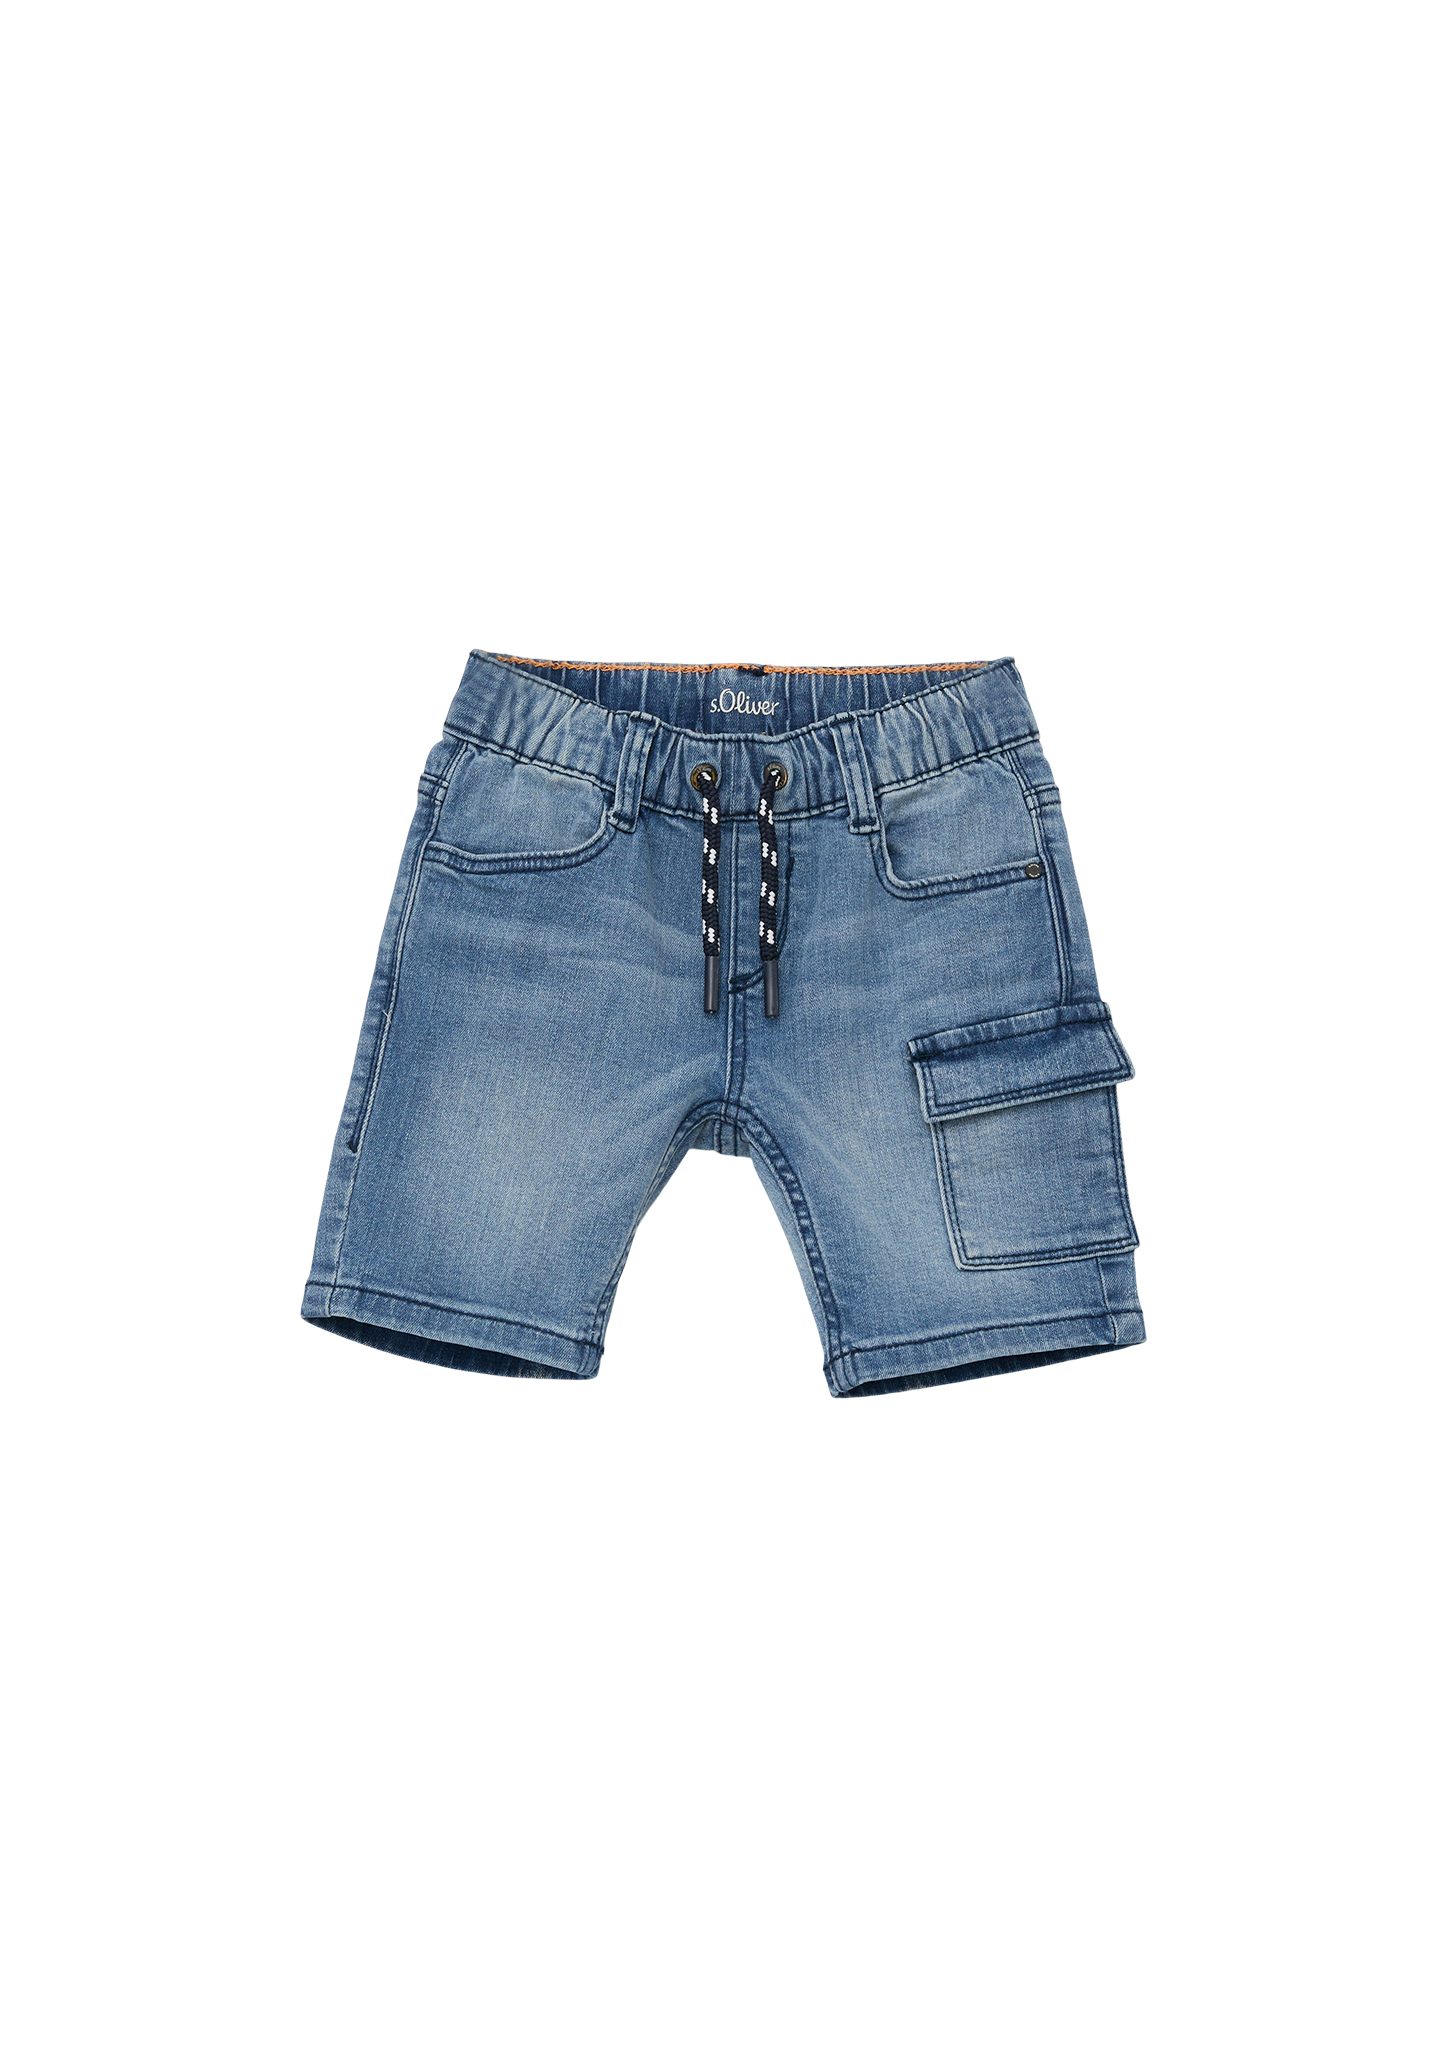 Brad Jeans-Bermuda Joggstyle Slim Waschung Rise Jeansshorts angedeuteter / Fit Mid / Slim Leg Tunnelzug, s.Oliver /